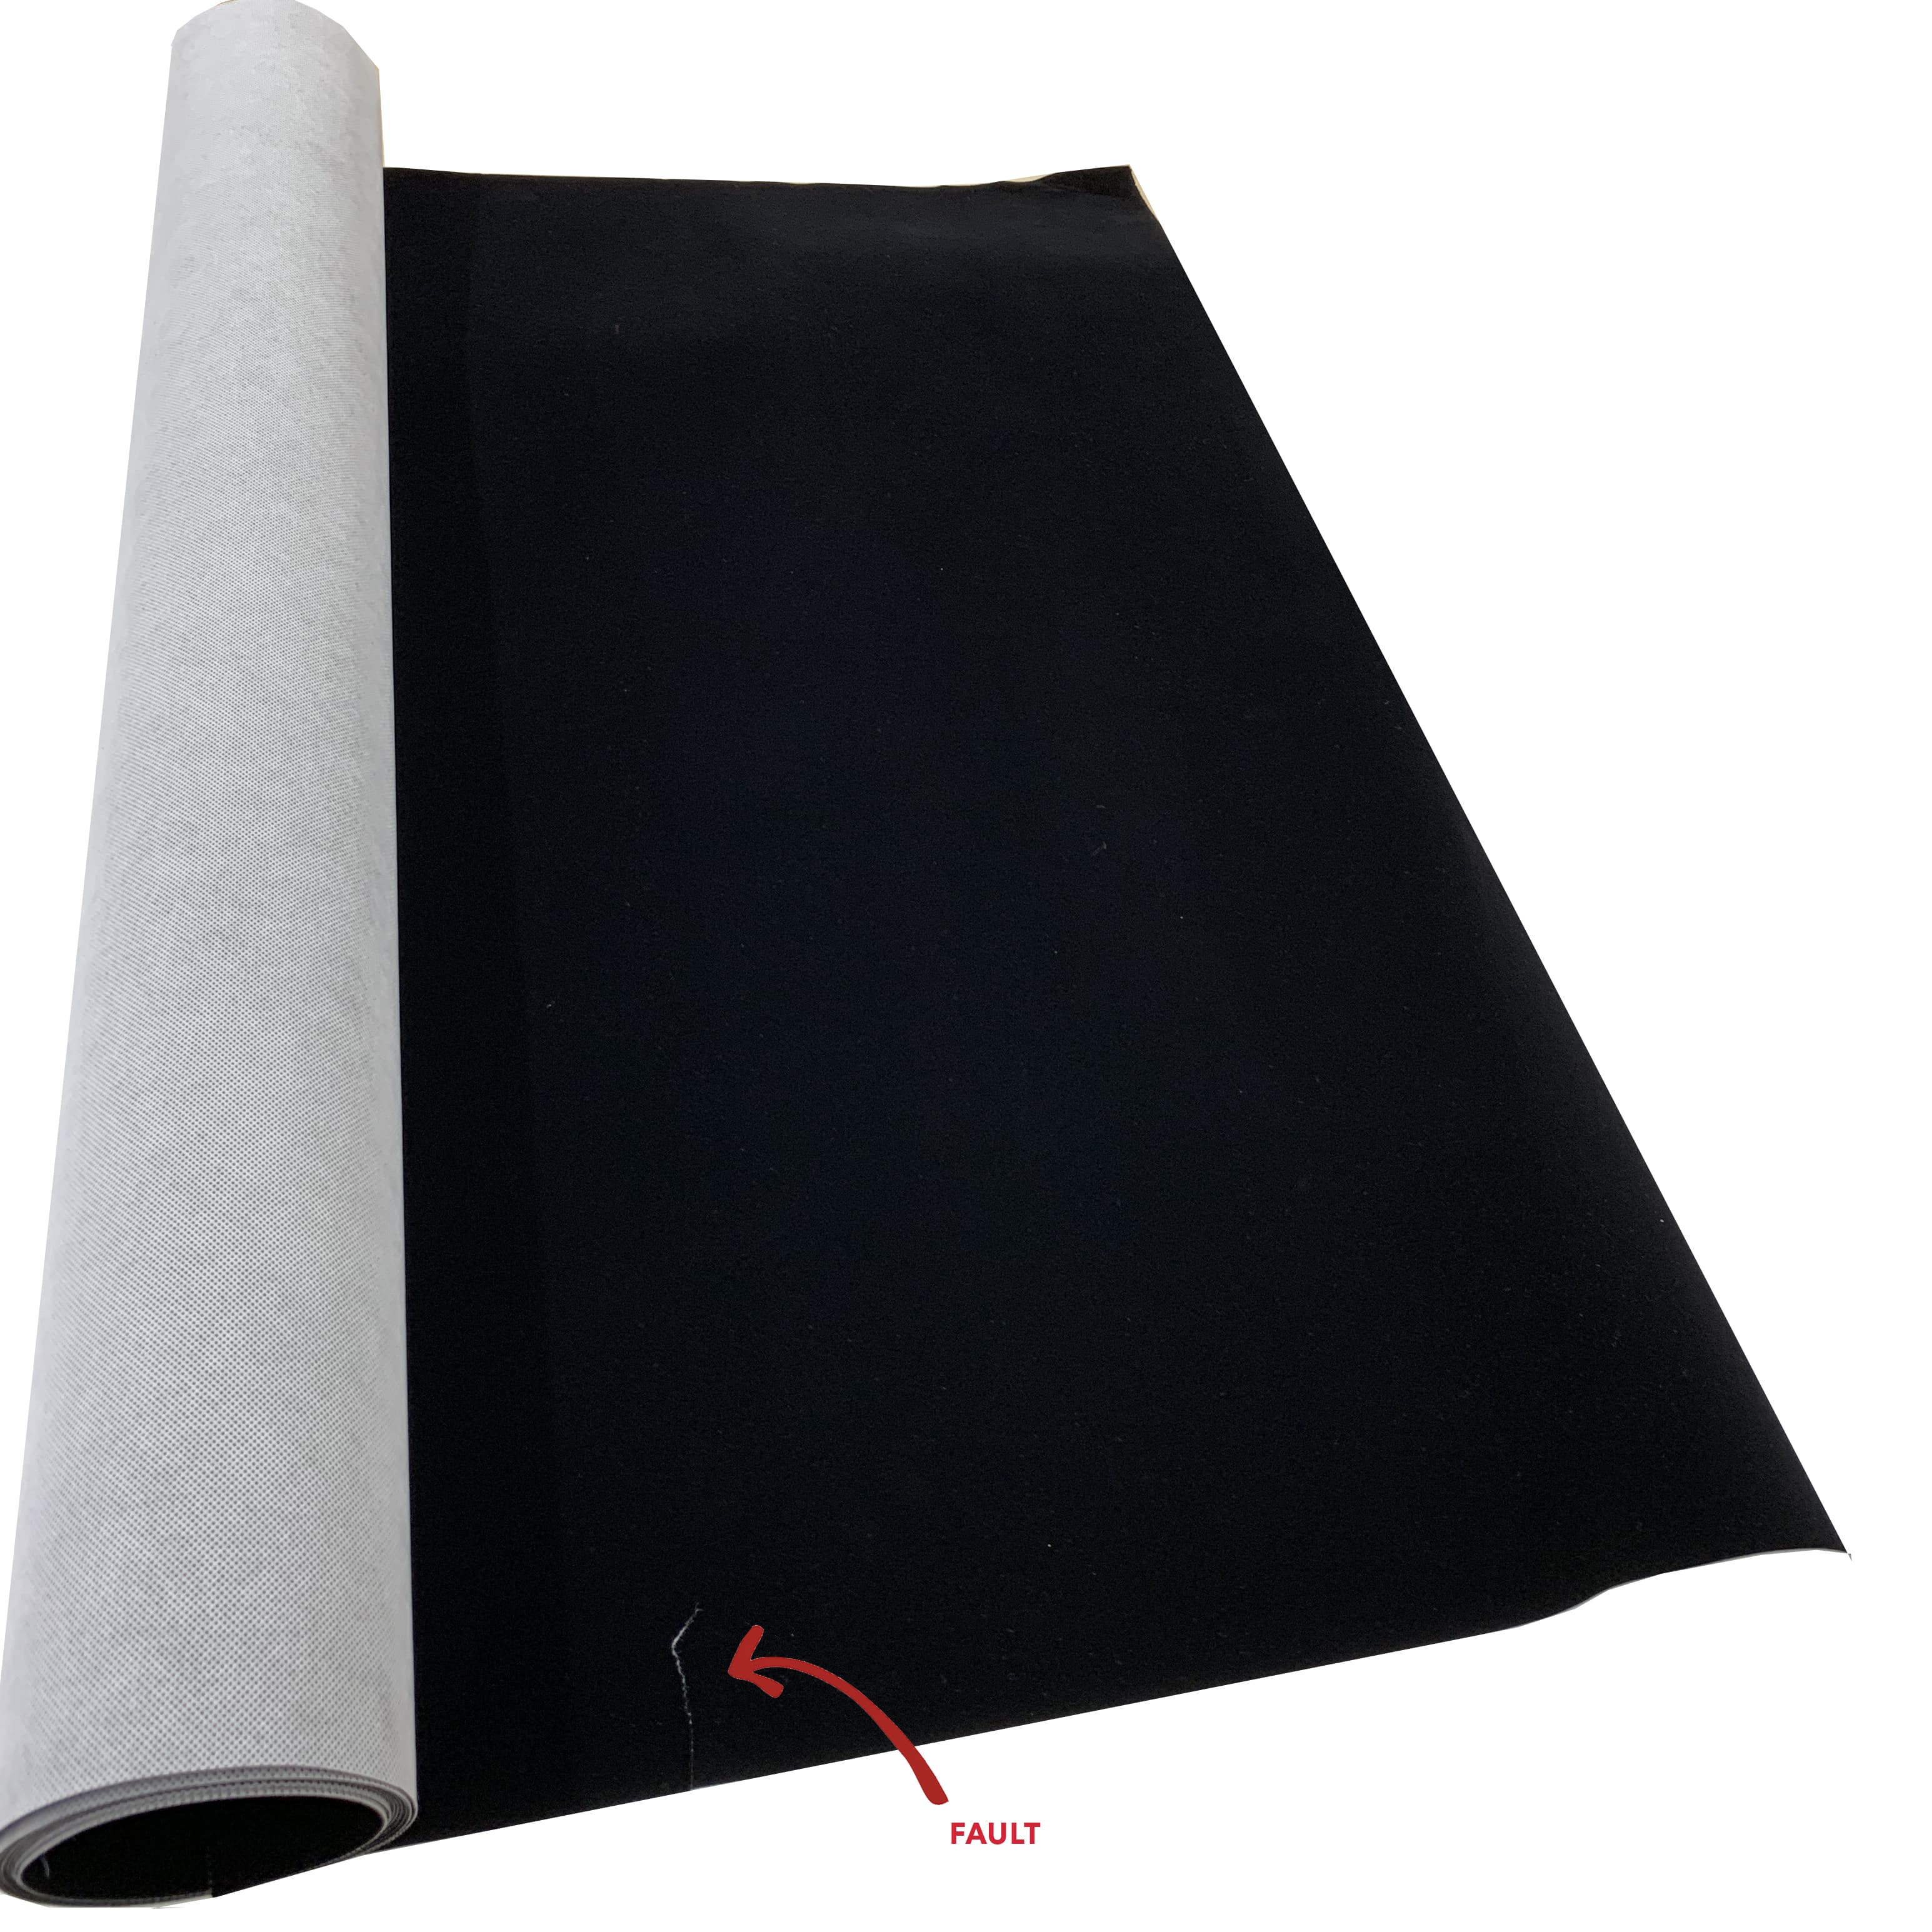 Black 'Fotodrop' Synthetic Non-Woven Portrait Background 0.91m x 2.75m (Pegs and Backdrop Stand not included)